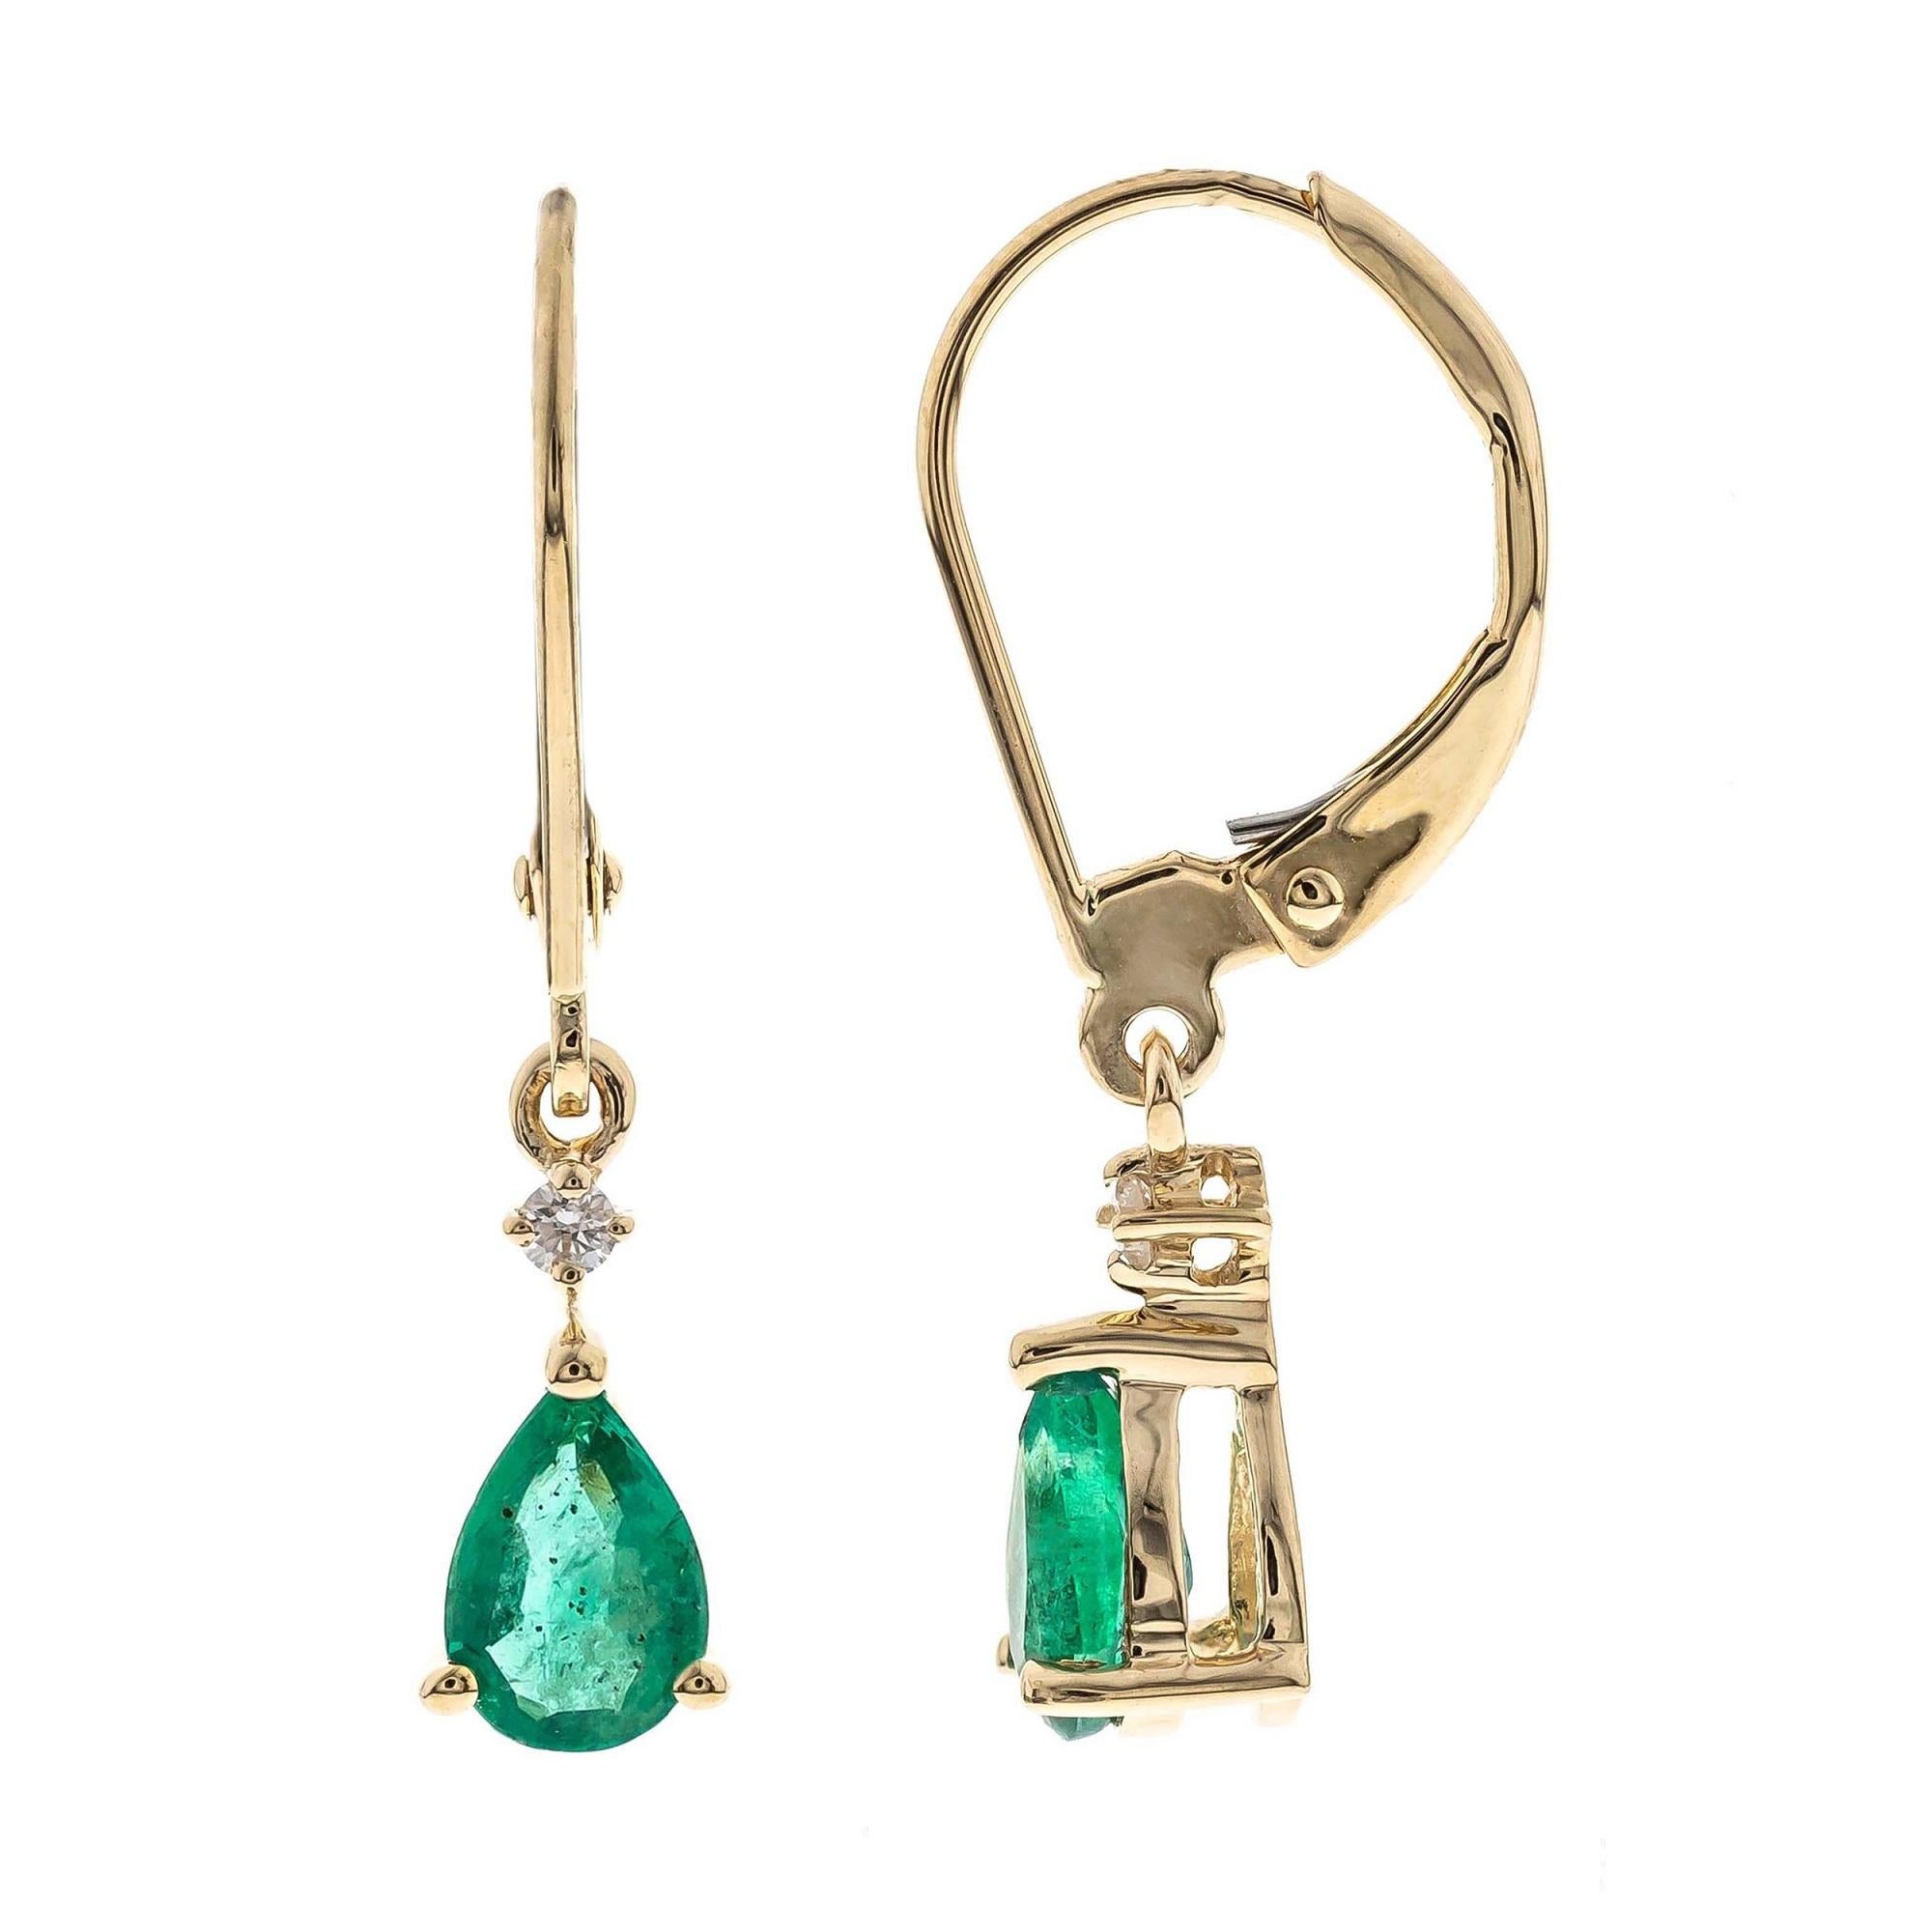 Decorate yourself in elegance with this Earring is crafted from 14K Yellow Gold by Gin & Grace Earring. This Earring is made up of 4X6 Pear-Cut prong setting Emerald (2 pcs) 0.72 Carat and Round-Cut prong setting Diamond (2 pcs) 0.03 Carat. This